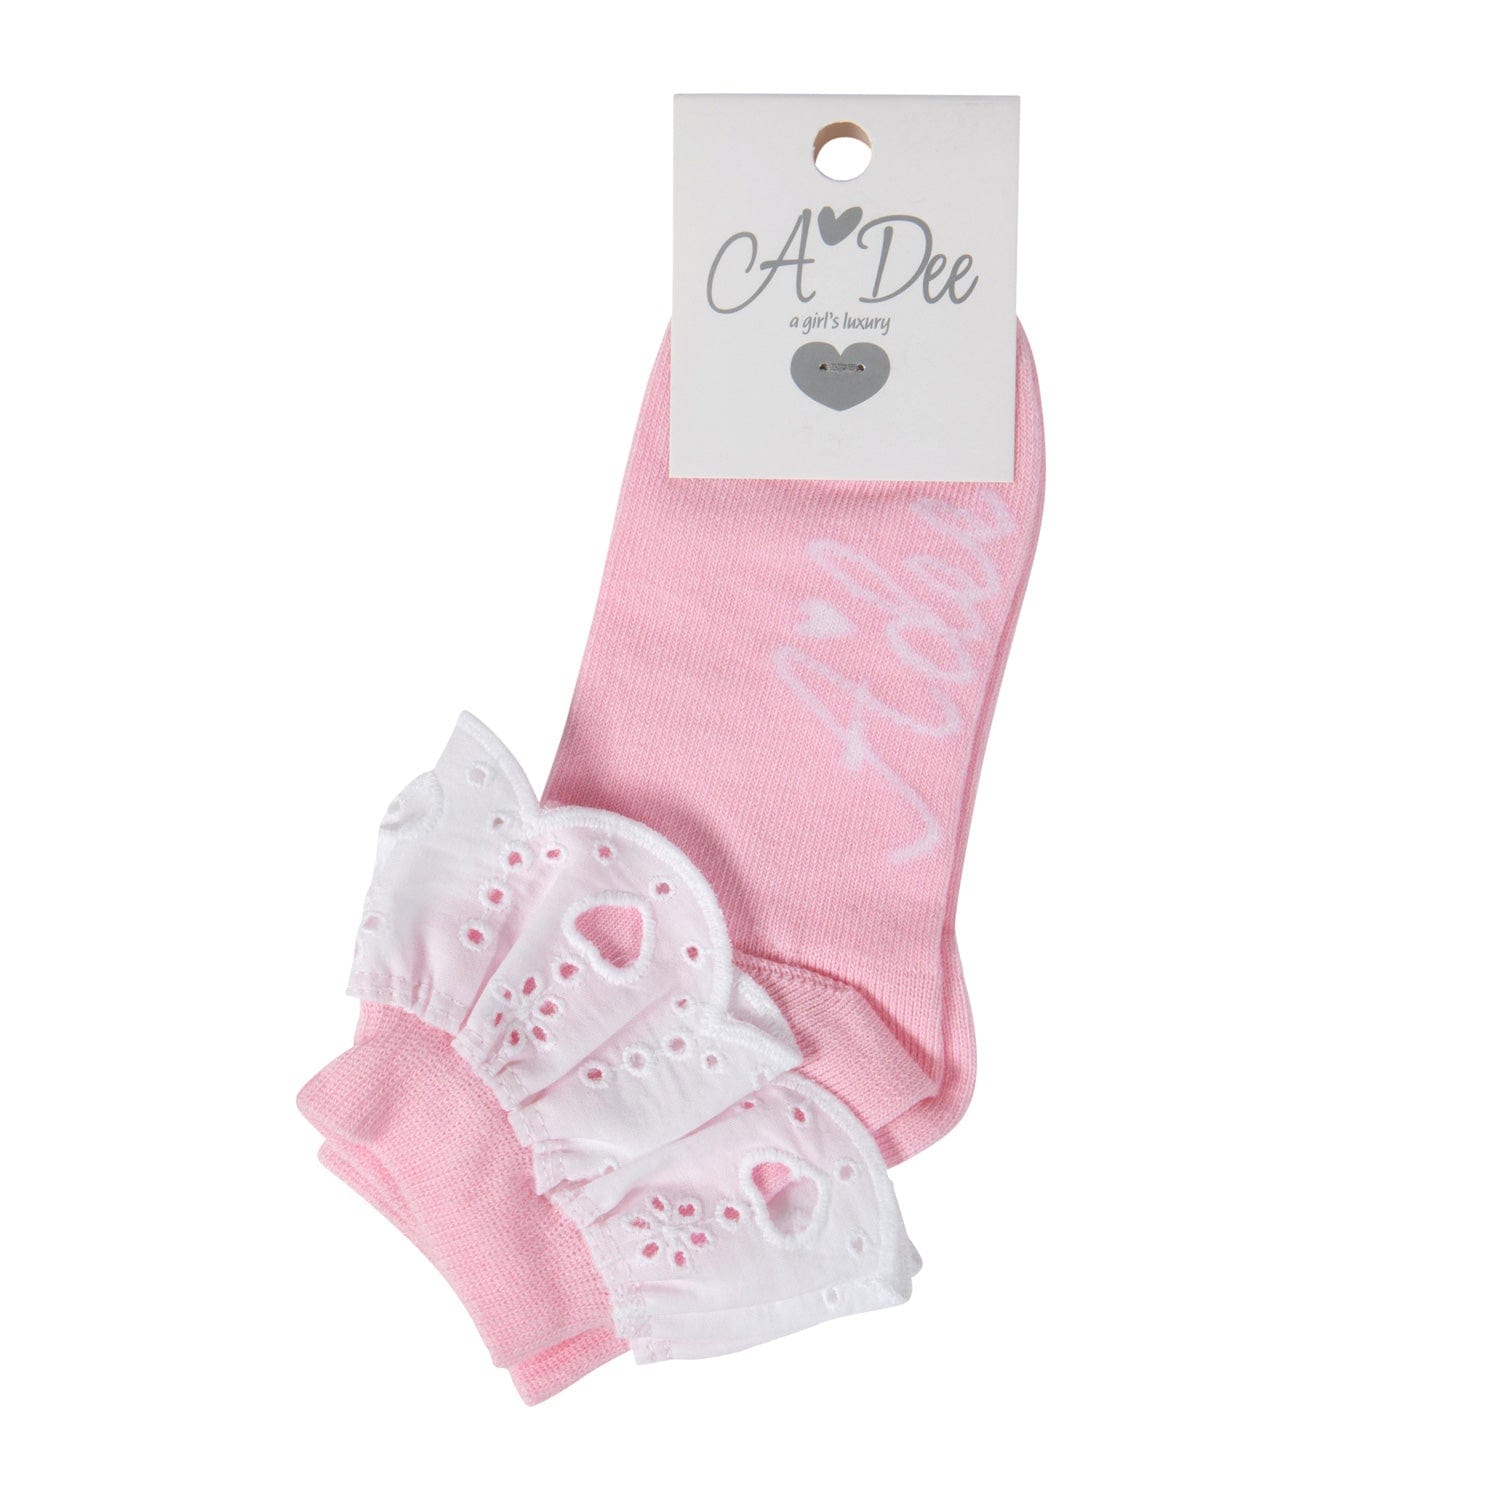 A-Dee Coats & Jackets S241903-4001 Adee Girls Ariel Lenni Pink Fairy Broderie Anglaise Ankle Sock